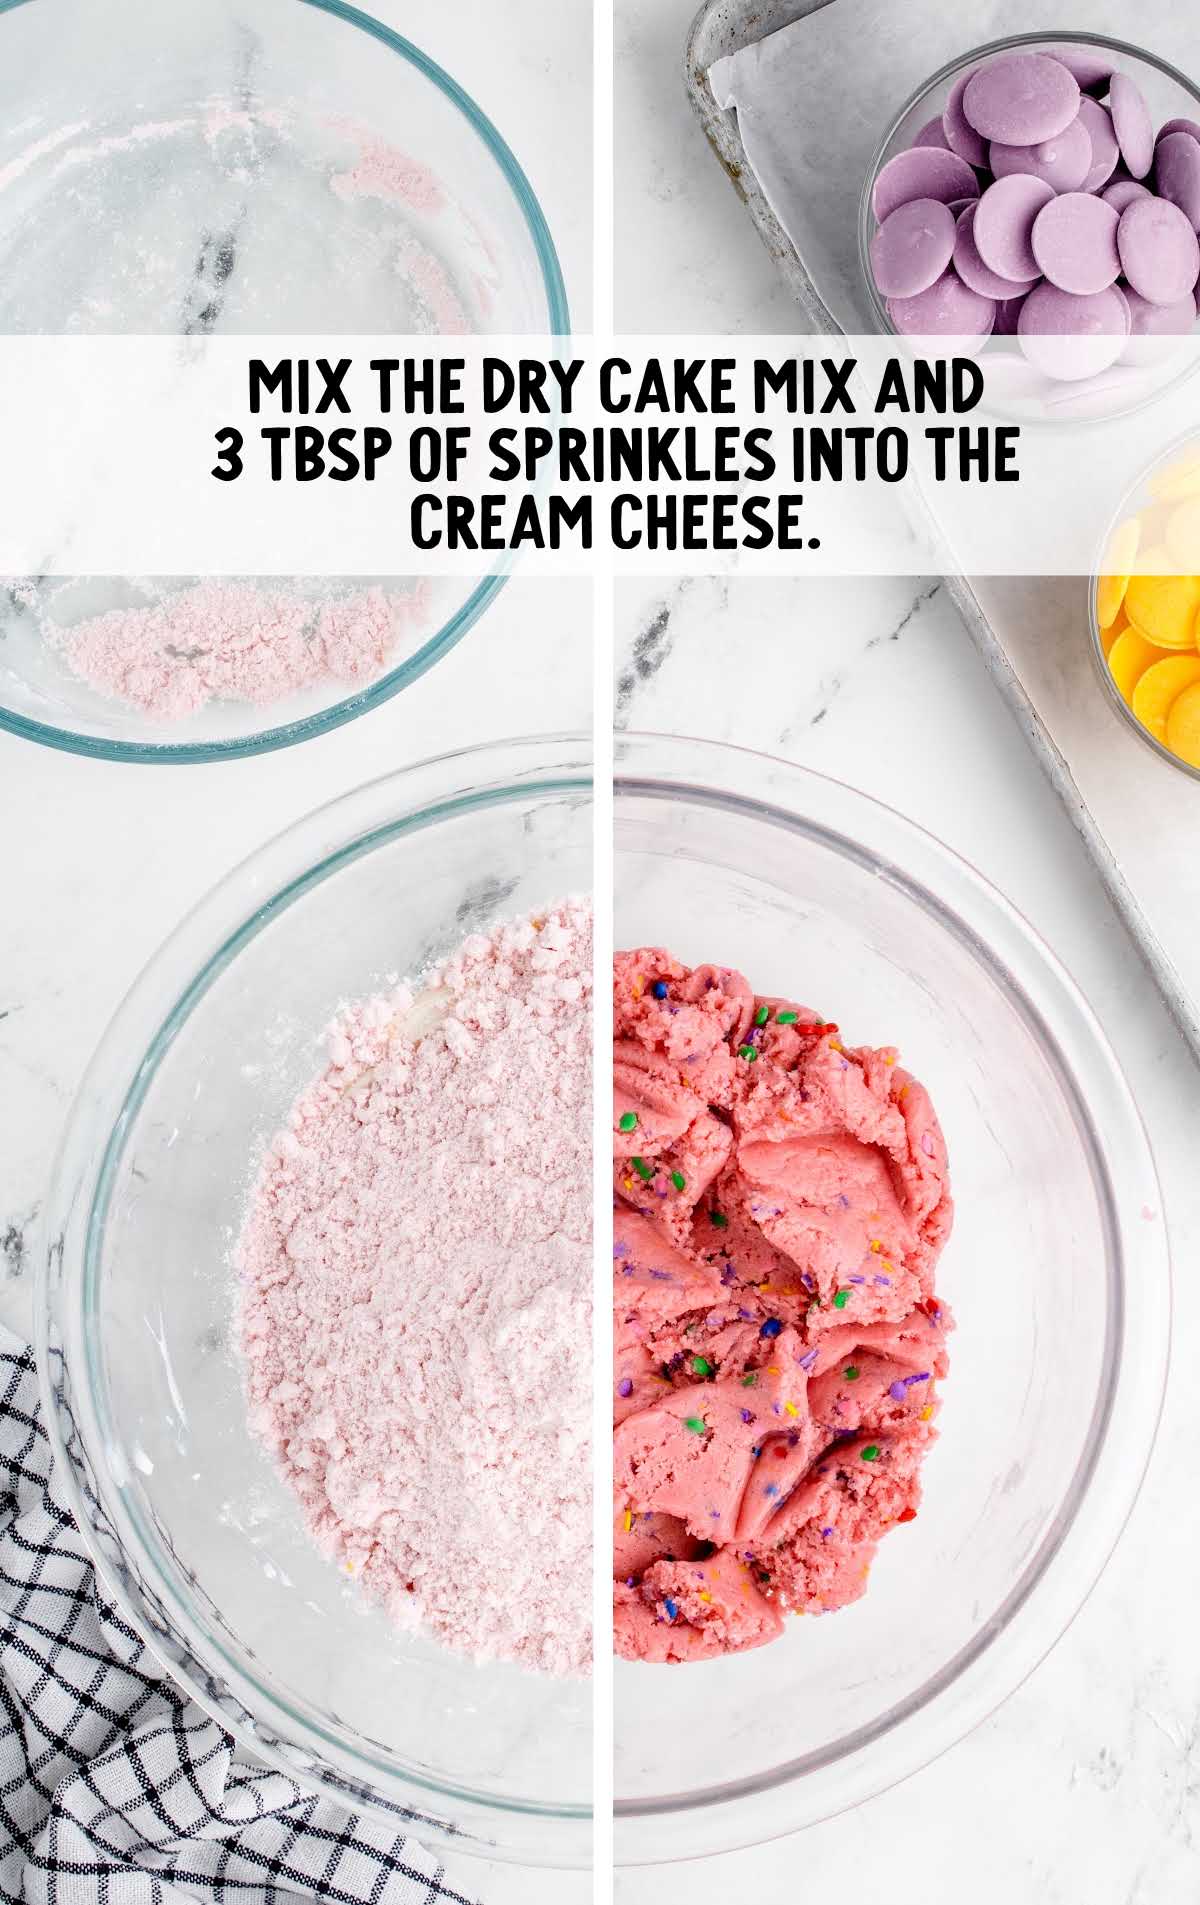 dry cake mix and sprinkles mixed with the cream cheese in a bowl